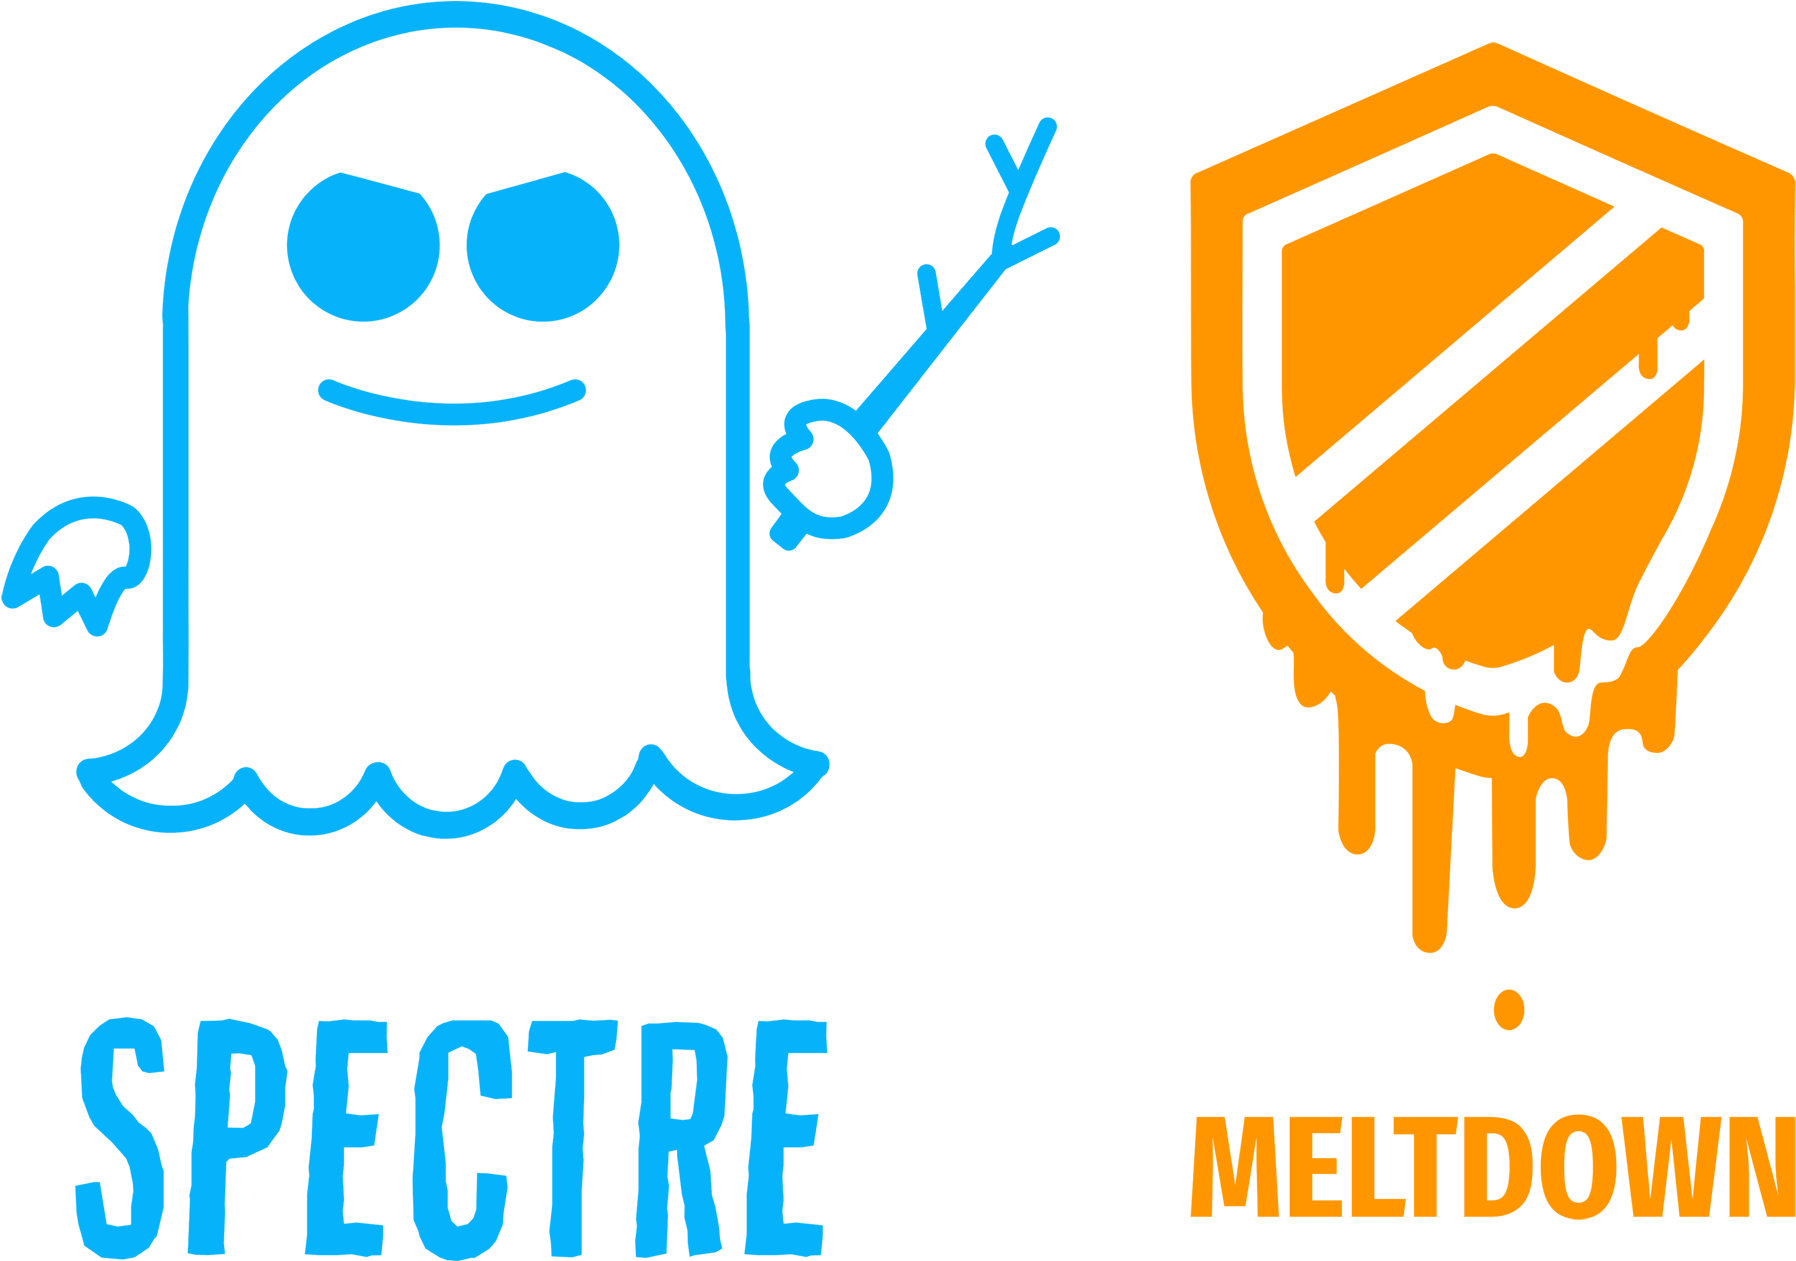 However, Most Windows 10 Users Will Hardly Notice Any - Spectre And Meltdown (2400x1260)